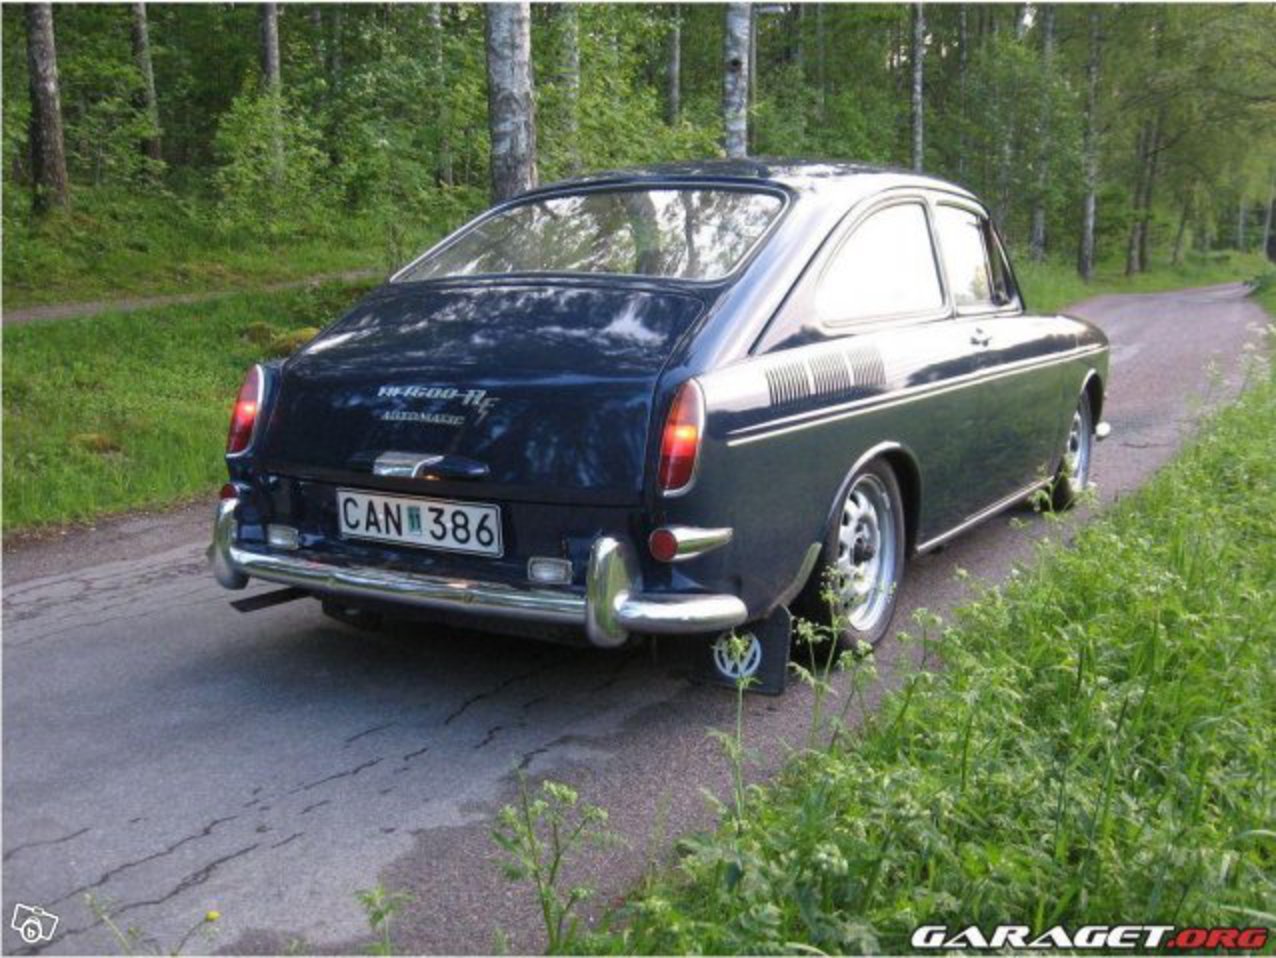 Volkswagen 1600 TLE fastback. View Download Wallpaper. 638x479. Comments